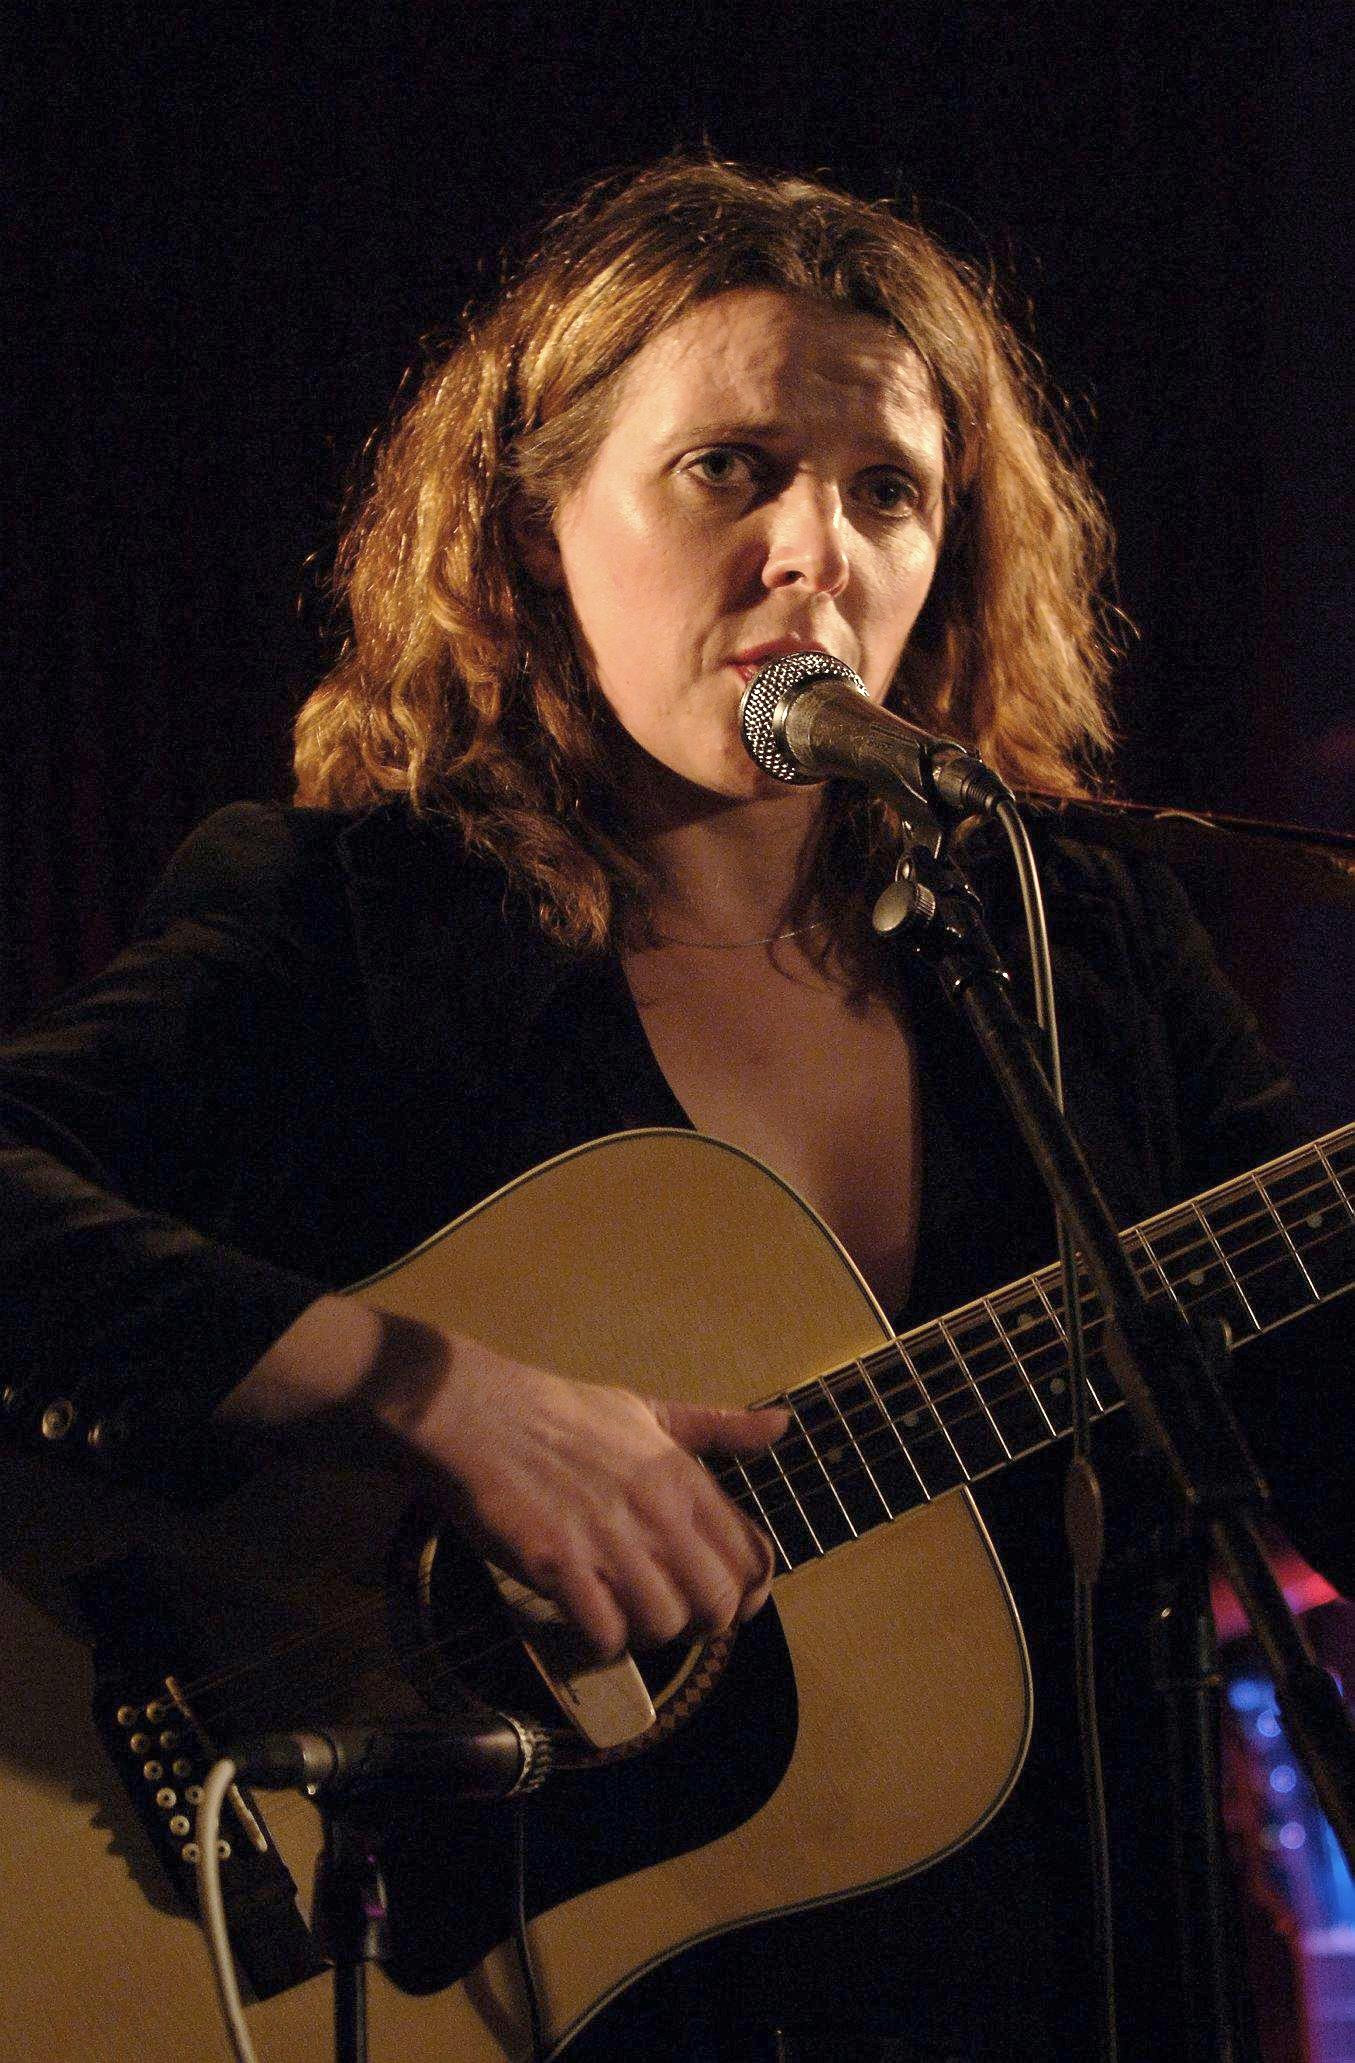 Abigail Hopkins, the daughter of Sir Anthony Hopkins, graces the stage with her performance at The Garage, Highbury Corner, in north London on February 21, 2006 | Source: Getty Images